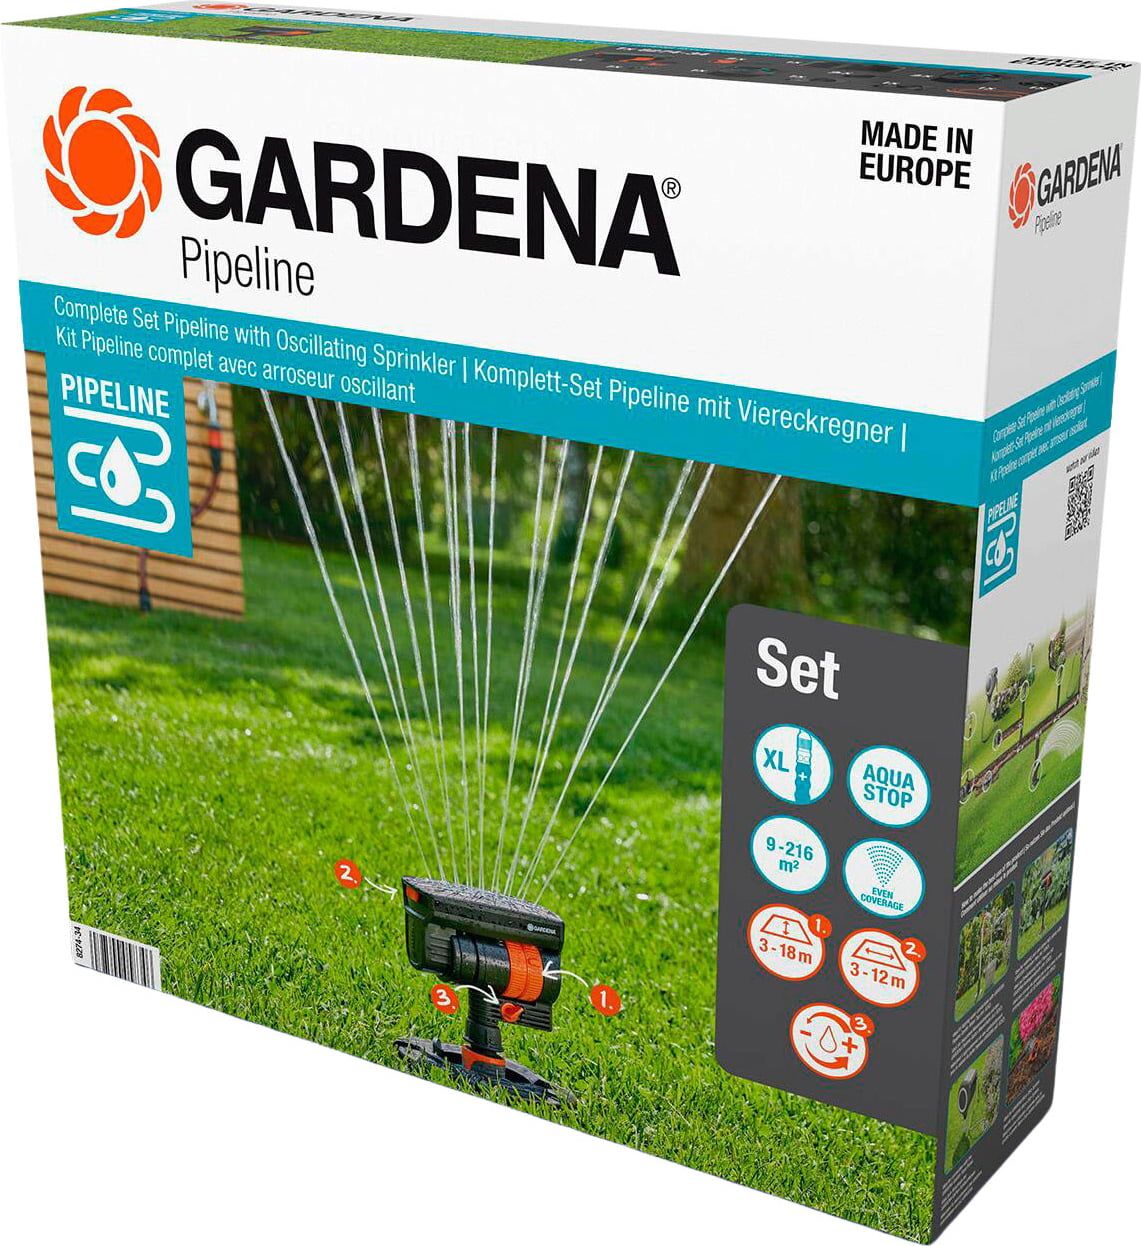 Lawn Watering Tips – Impact vs Oscillating Sprinkler Systems